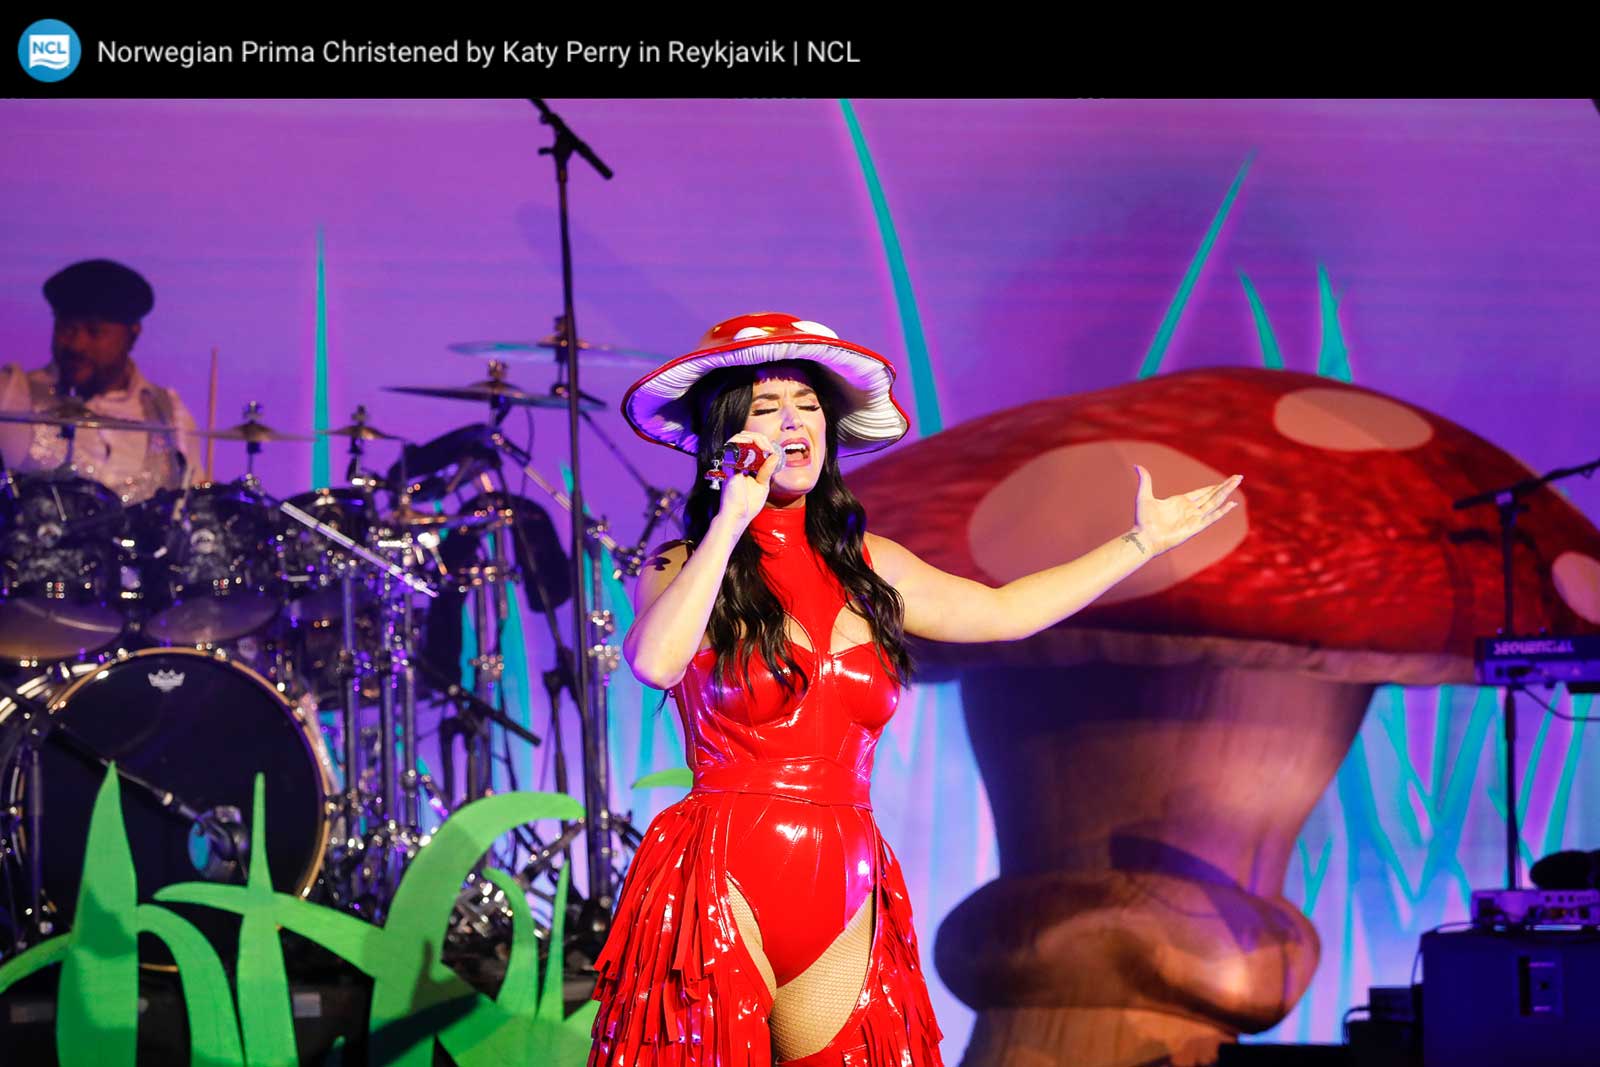 The christening of Norwegian Prima with Katy Perry